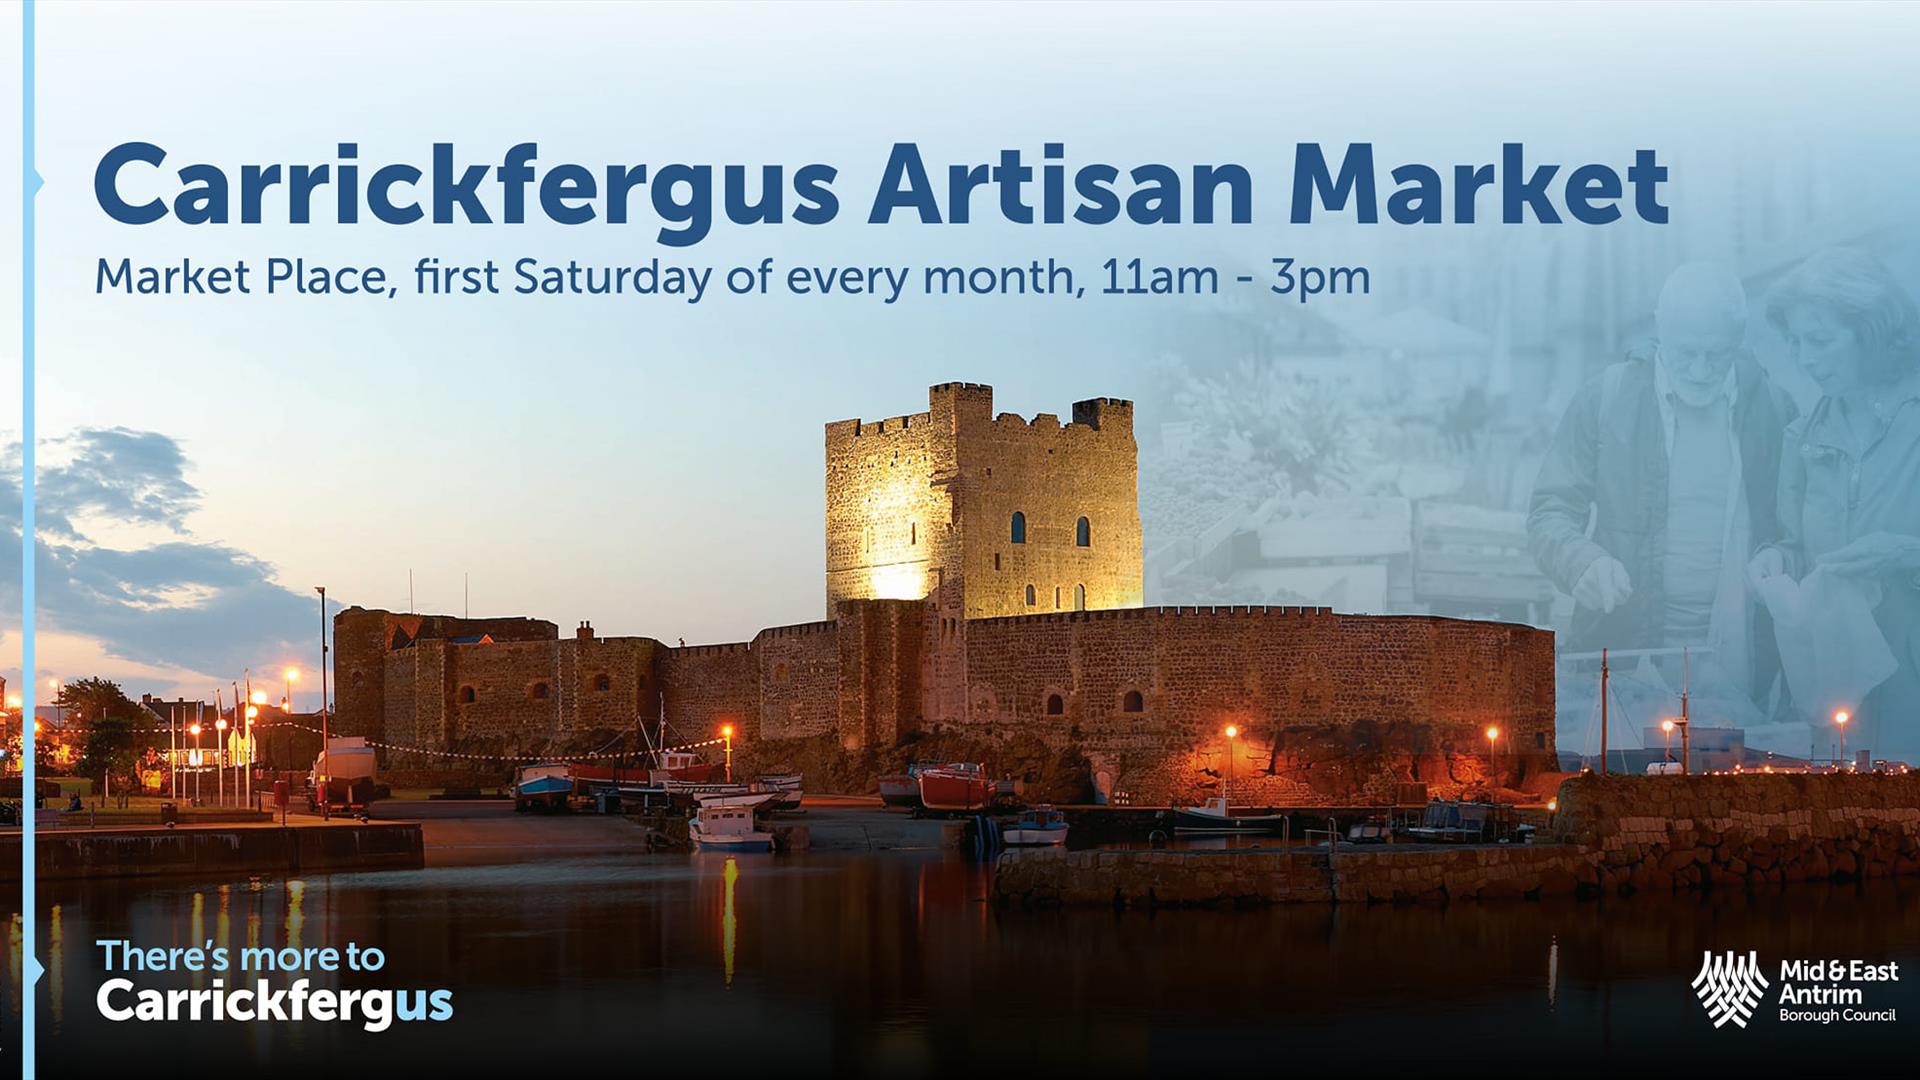 Poster to publicise Carrickfergus Artisan Market with image of Castle and time from 11am to 3pm on first Saturday of the Month.